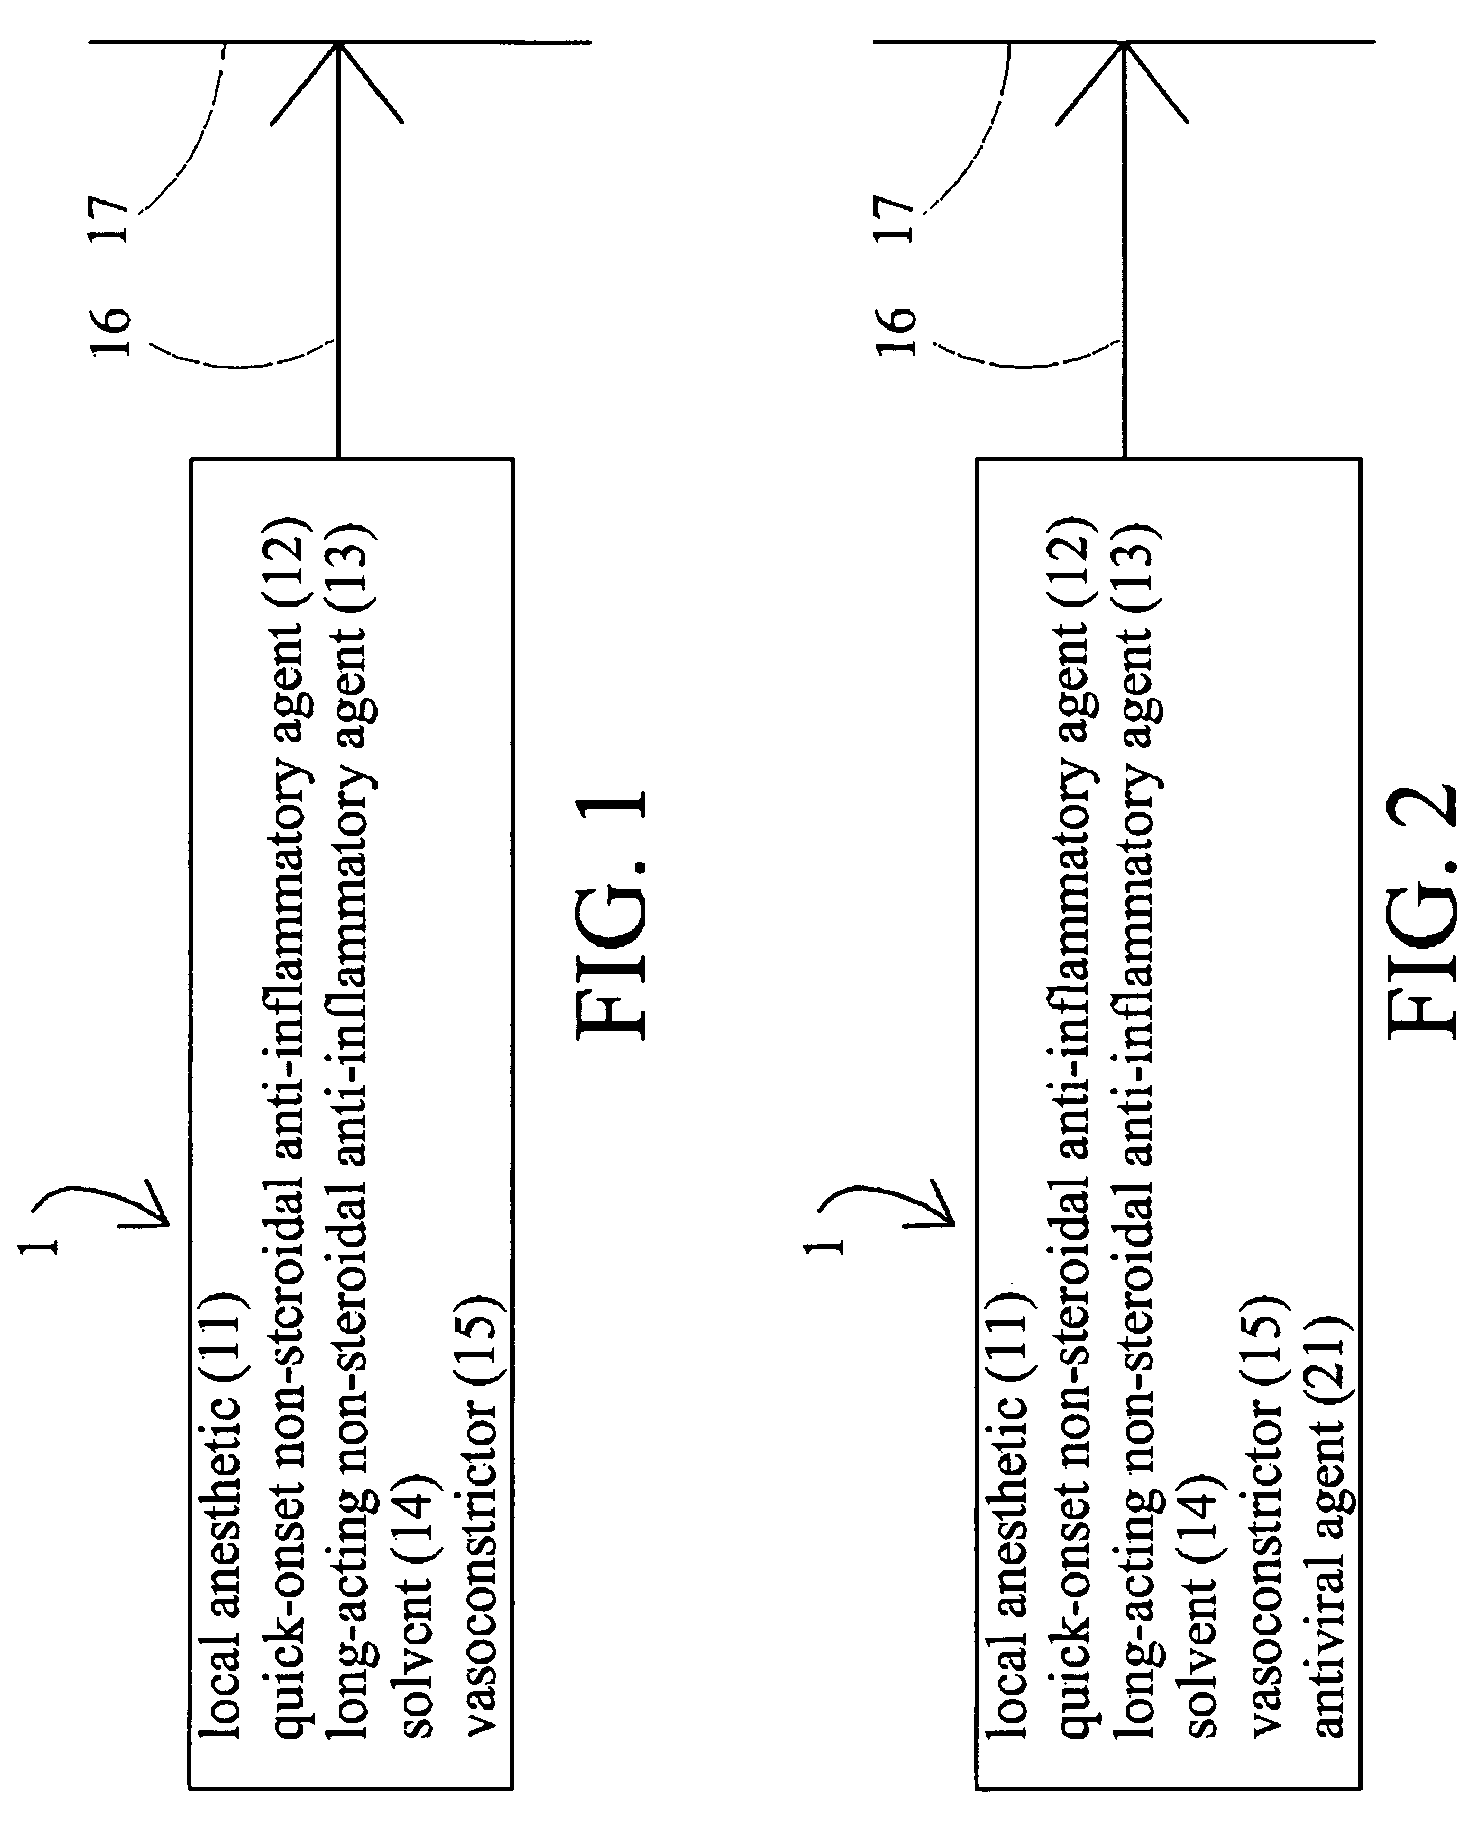 Topical preparation and method for transdermal delivery and localization of therapeutic agents